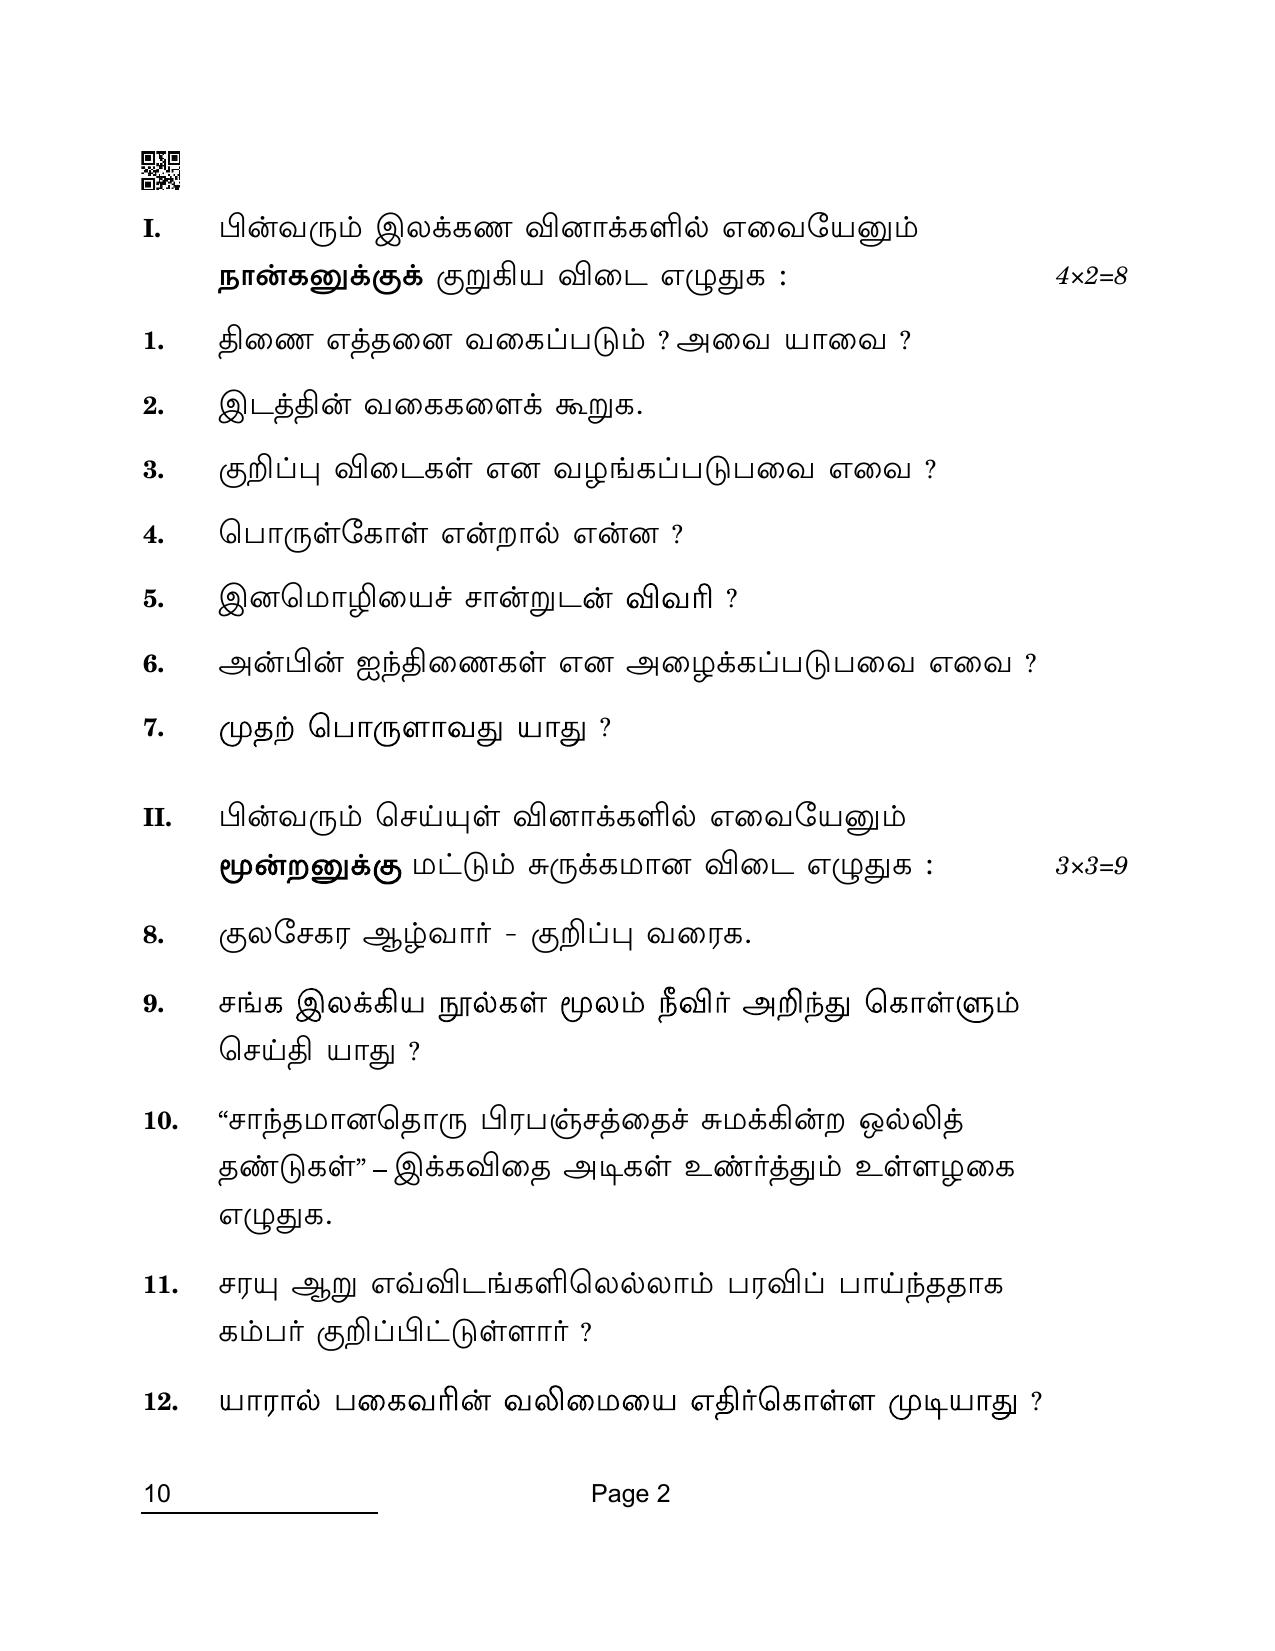 CBSE Class 10 10 Tamil 2022 Compartment Question Paper - Page 2